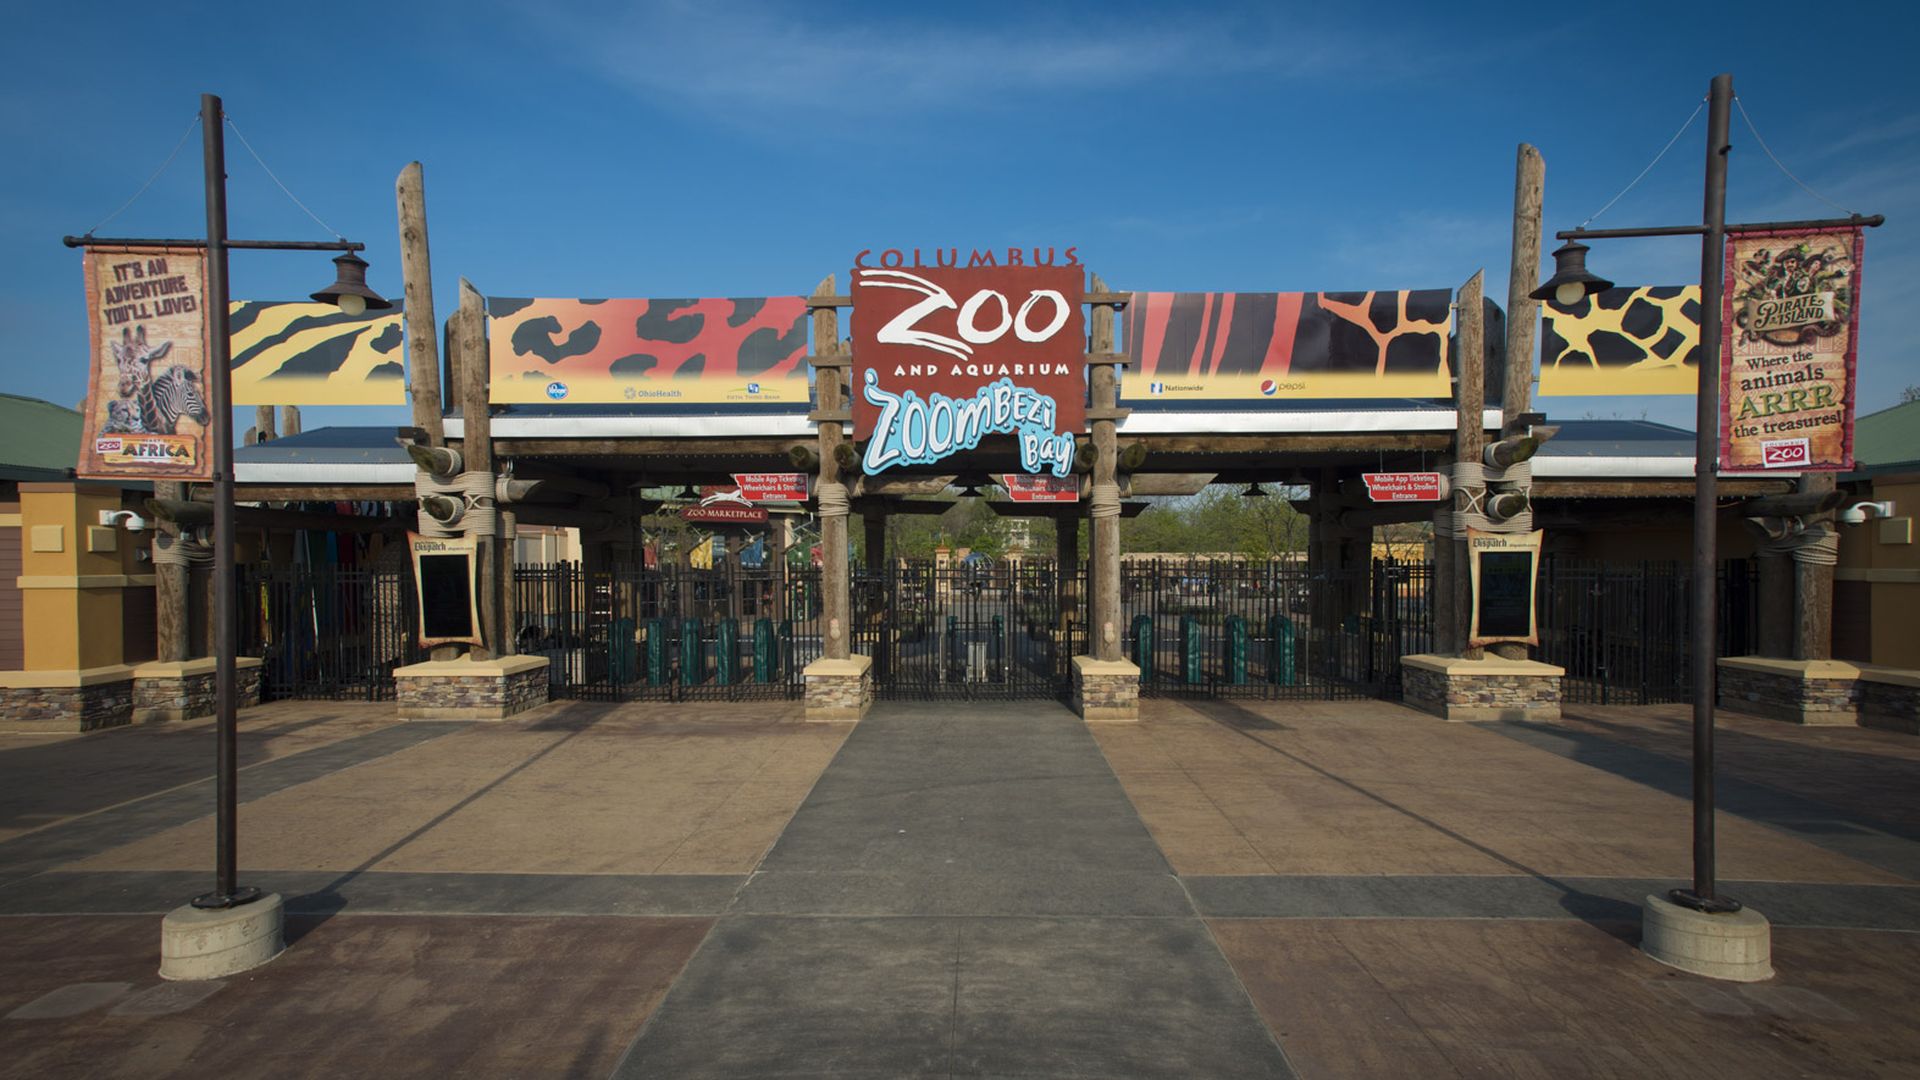 The entrance of the Columbus Zoo and Aquarium, with a sign covered in animal print